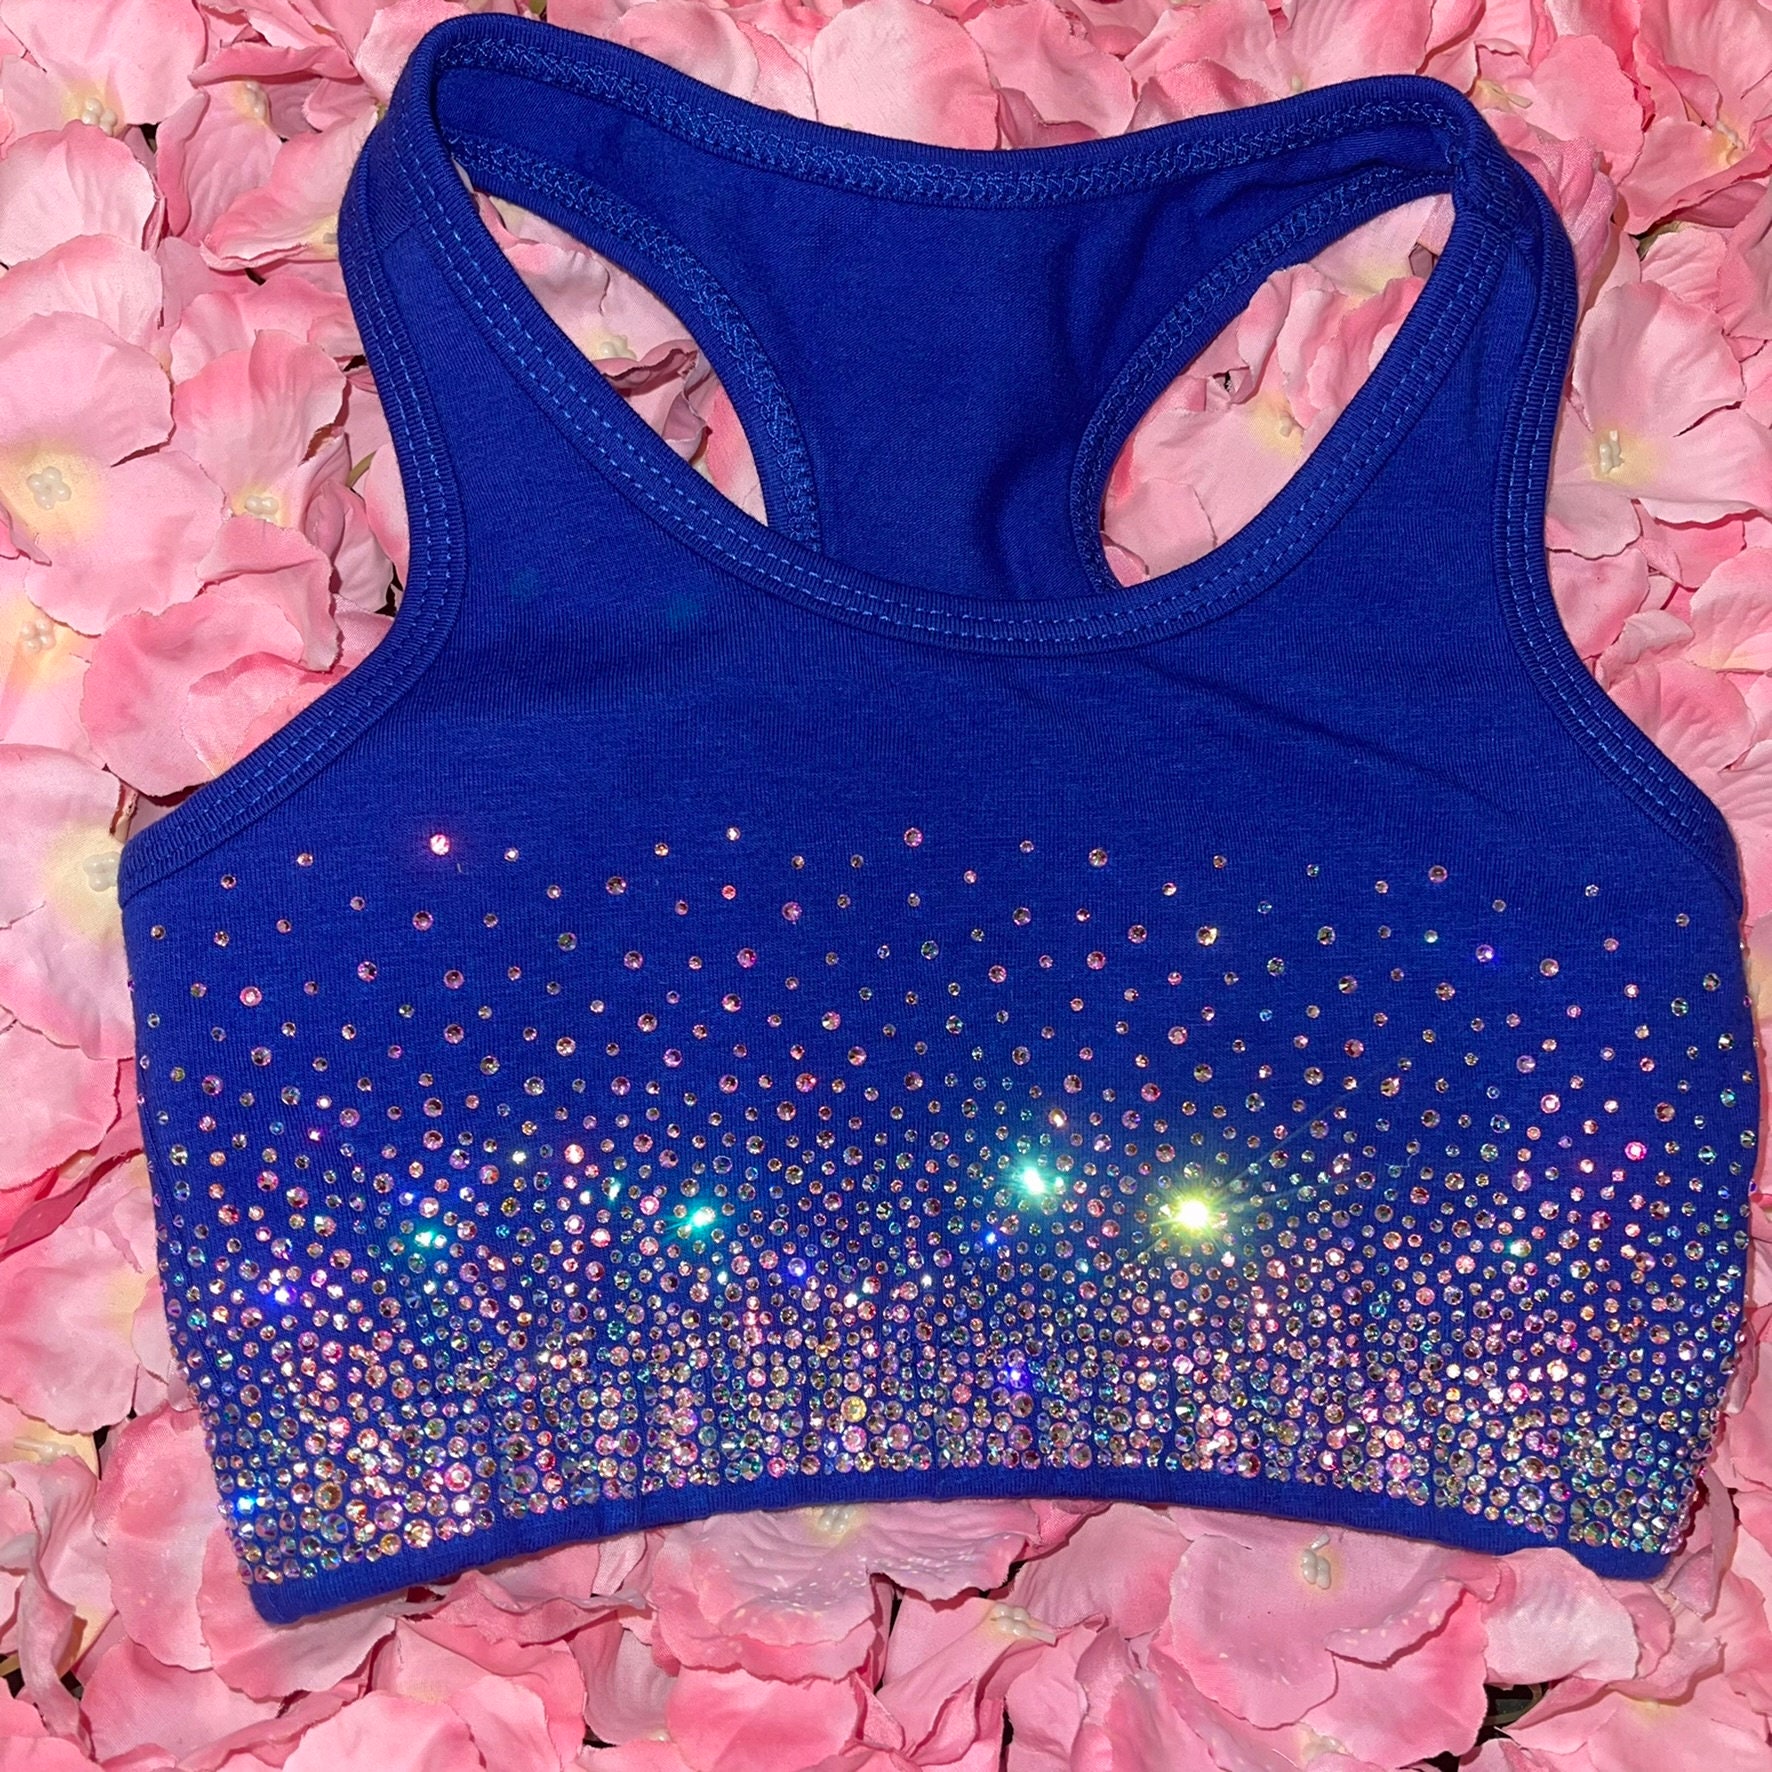 Heavy Ombré Style AB Rhinestone Cheer/ Dance Separates in Royal